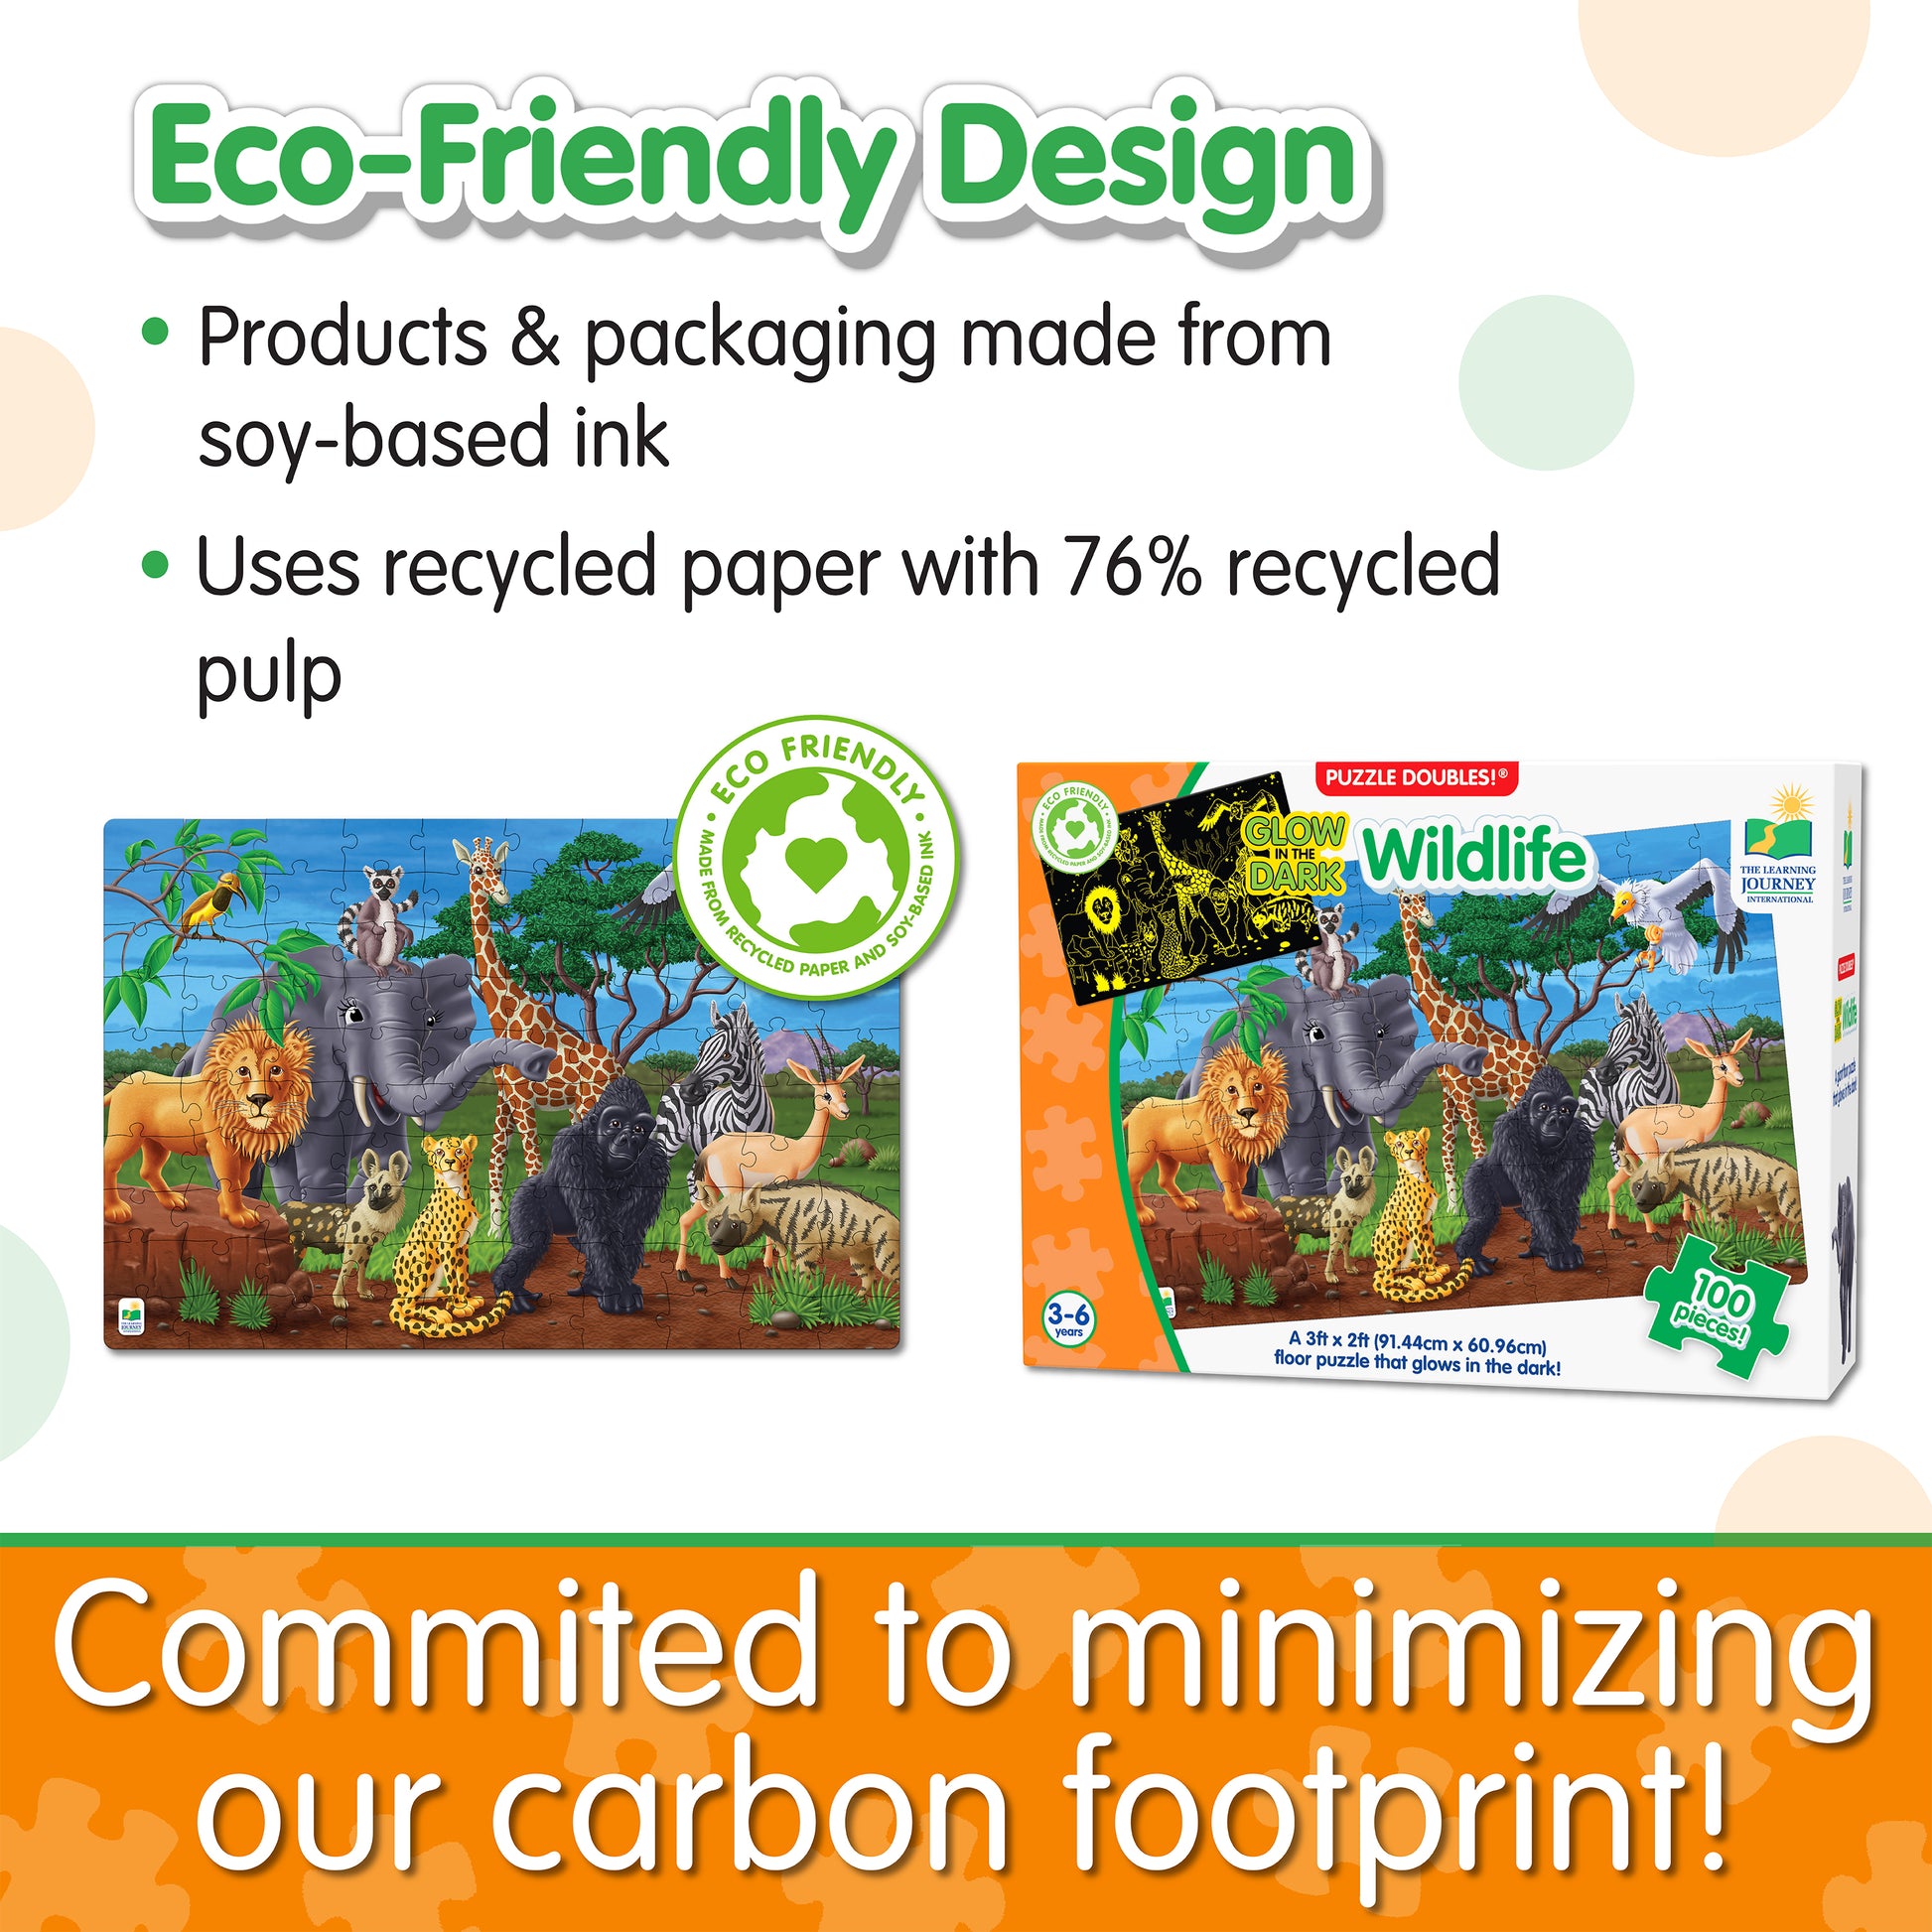 Infographic about Glow in the Dark - Wildlife's eco-friendly design that says, "Committed to minimizing our carbon footprint!"